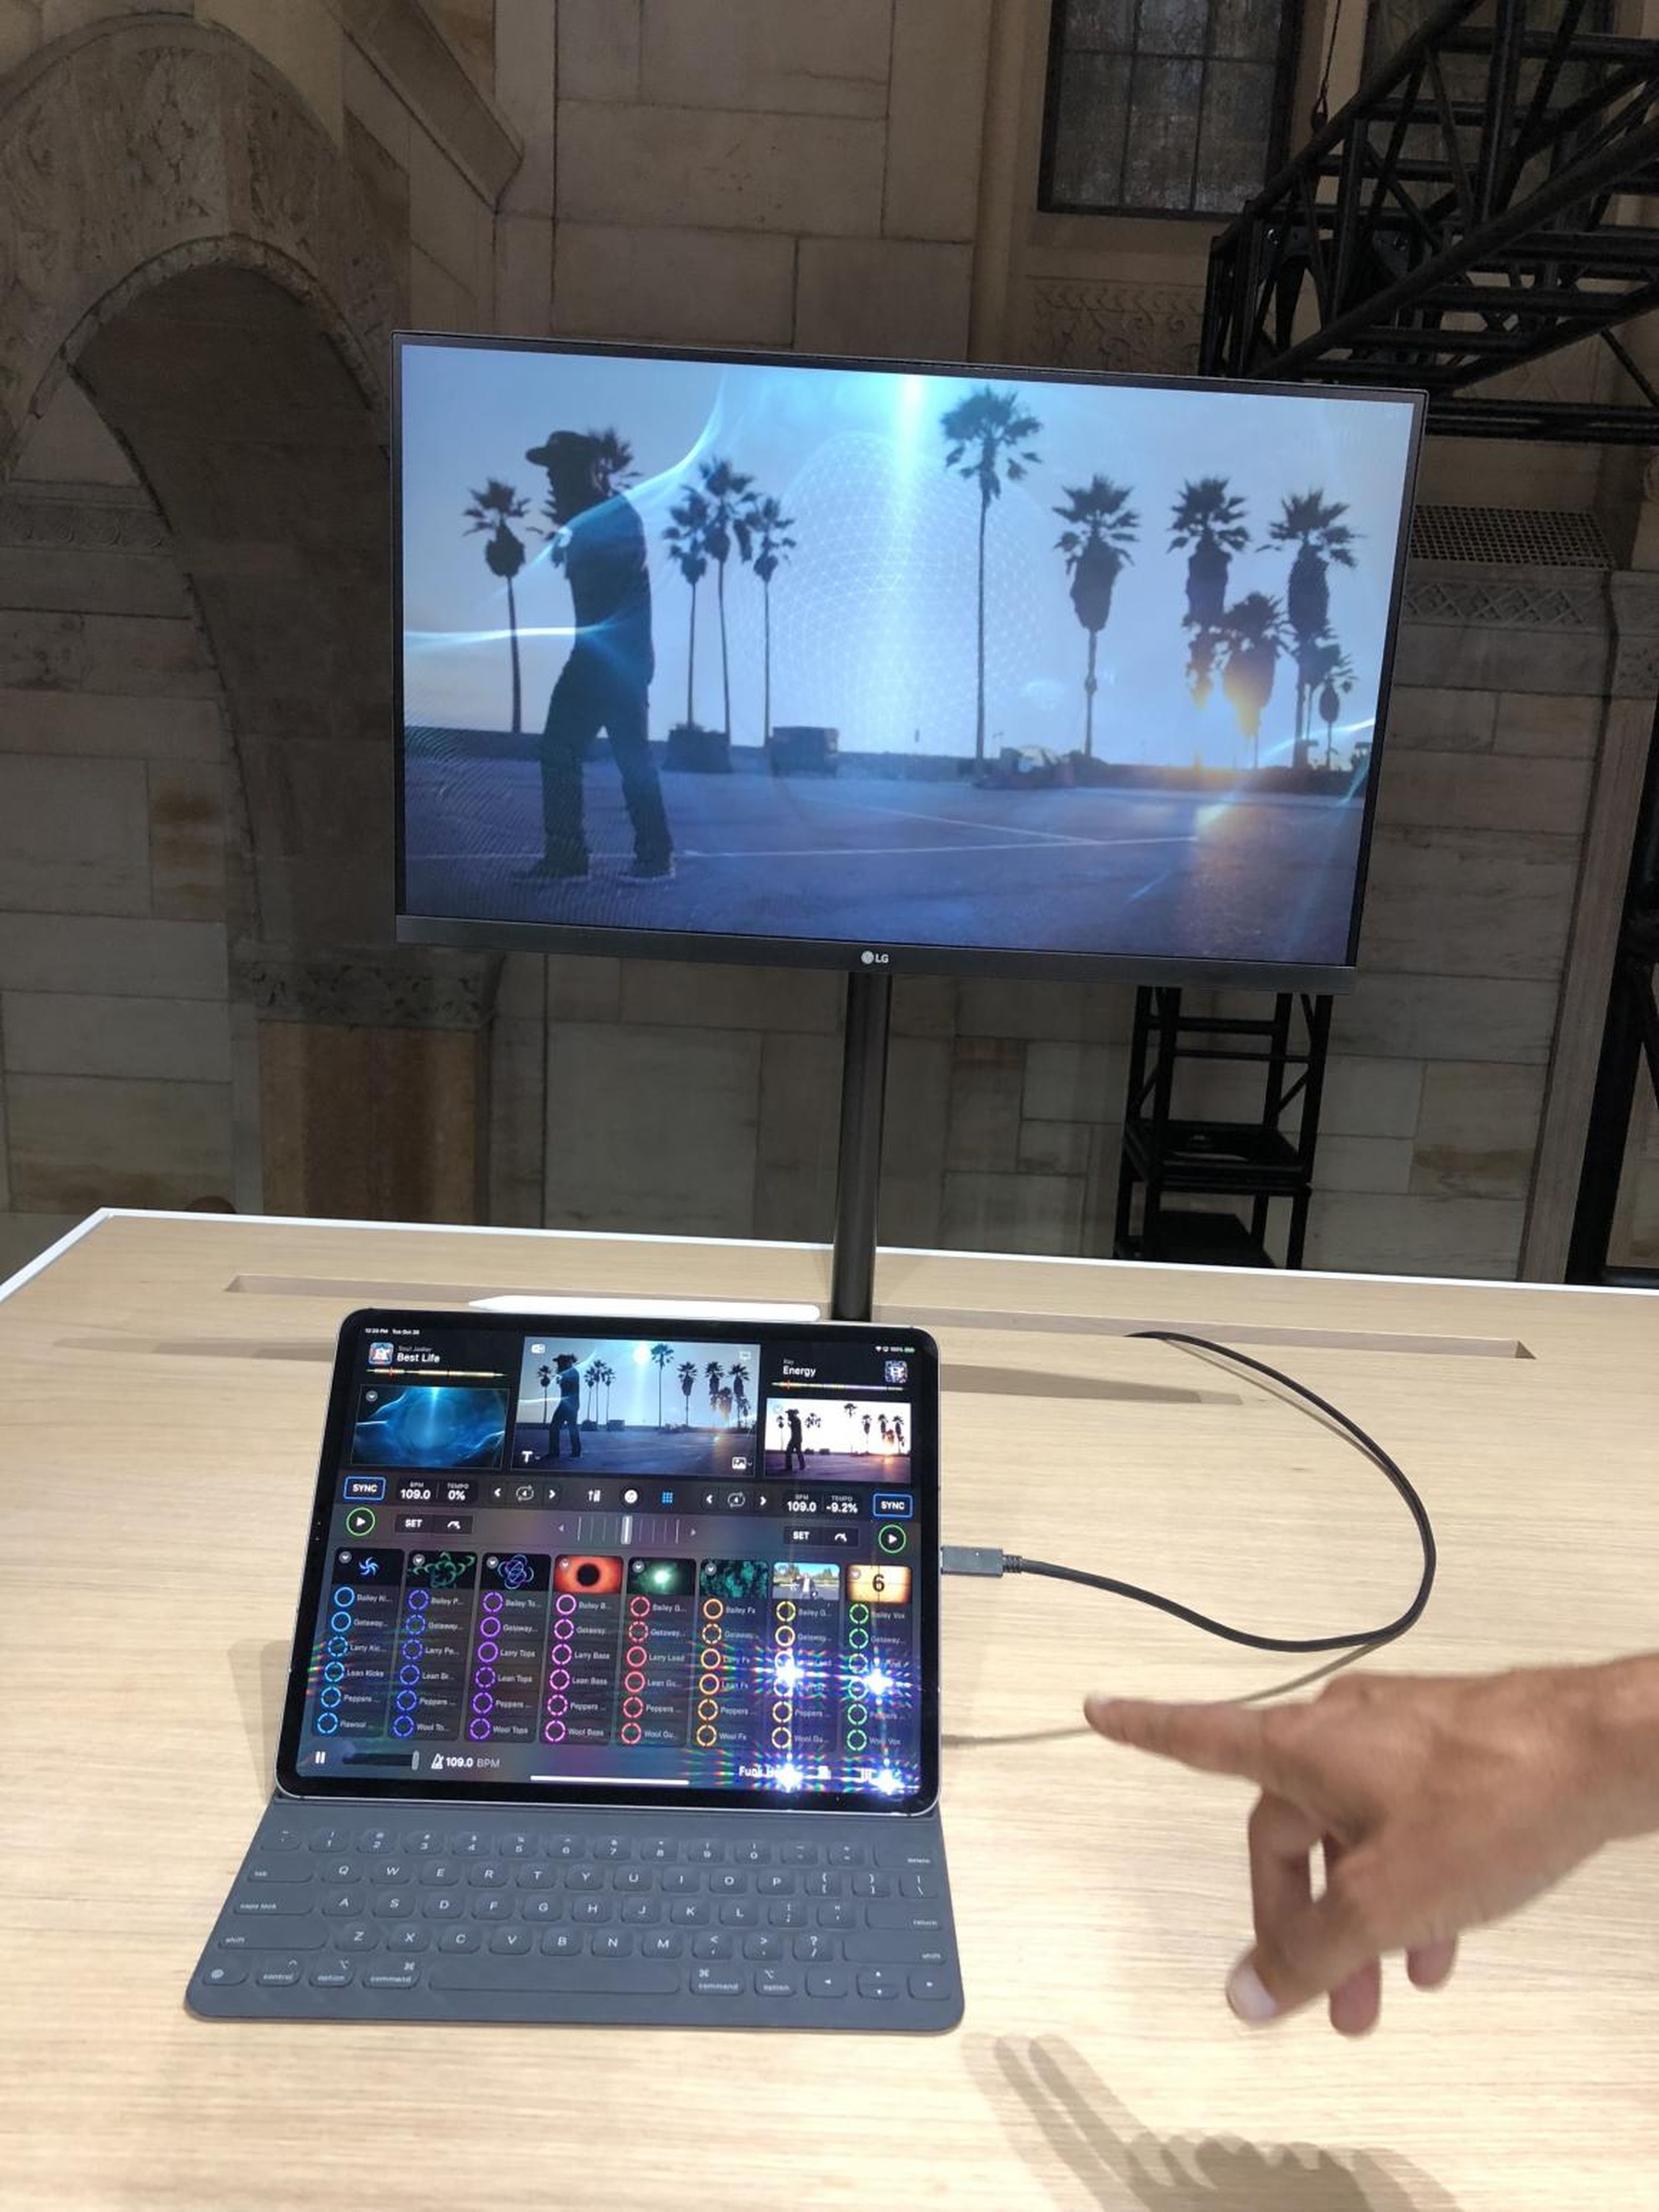 Or DJ. The USB-C port can also be used to hook up the iPad Pro to a computer monitor.